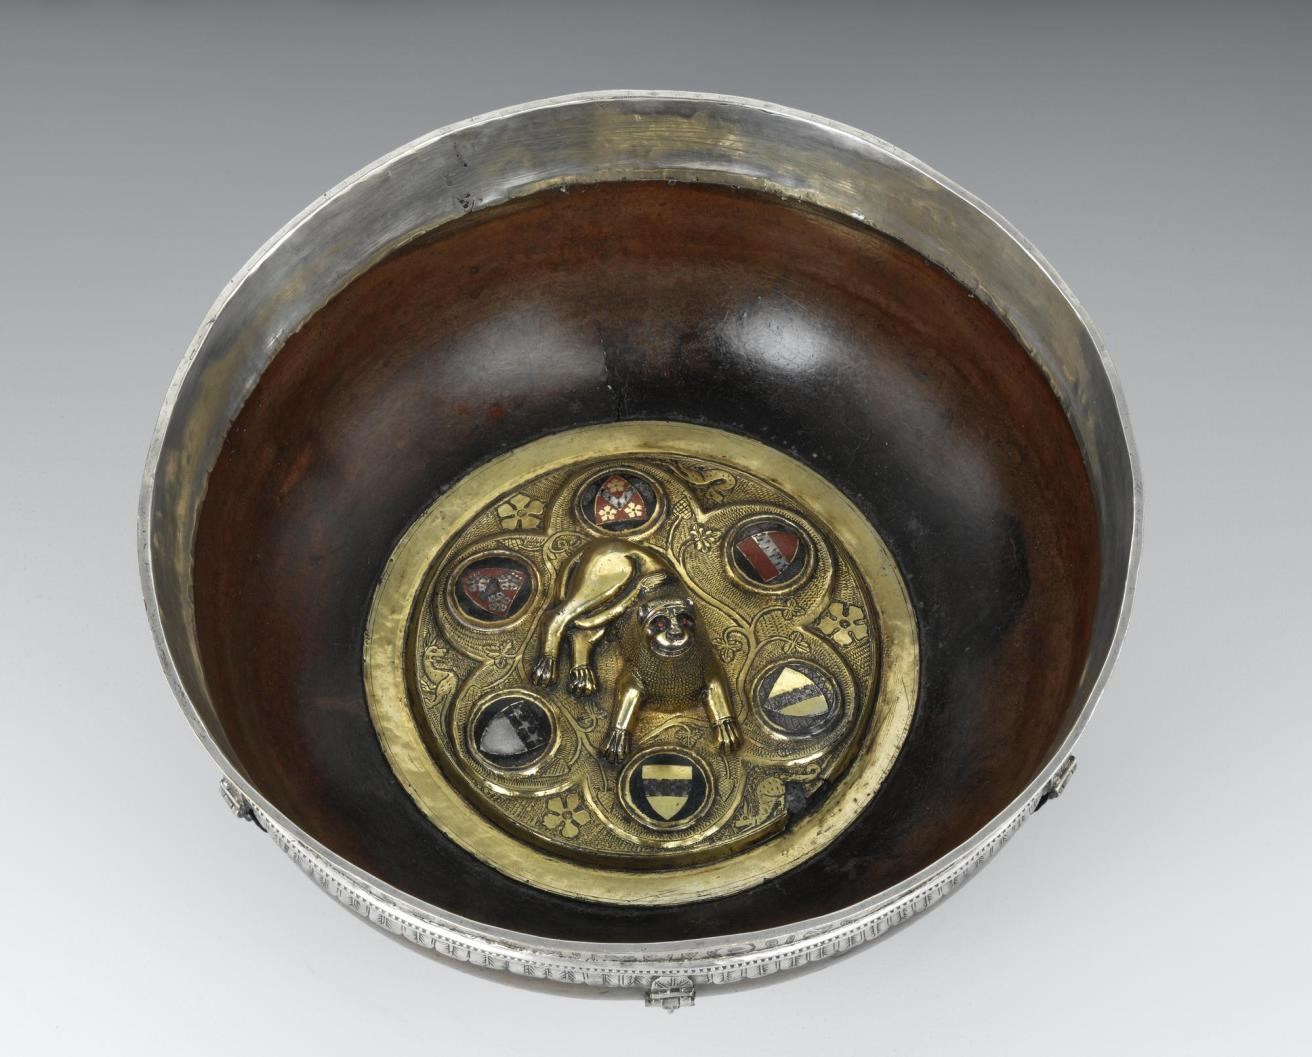 Inside of a wide metal-rimmed bowl or mazier. A golden disc at the base displays 6 coats of arms and a lion sculpture.